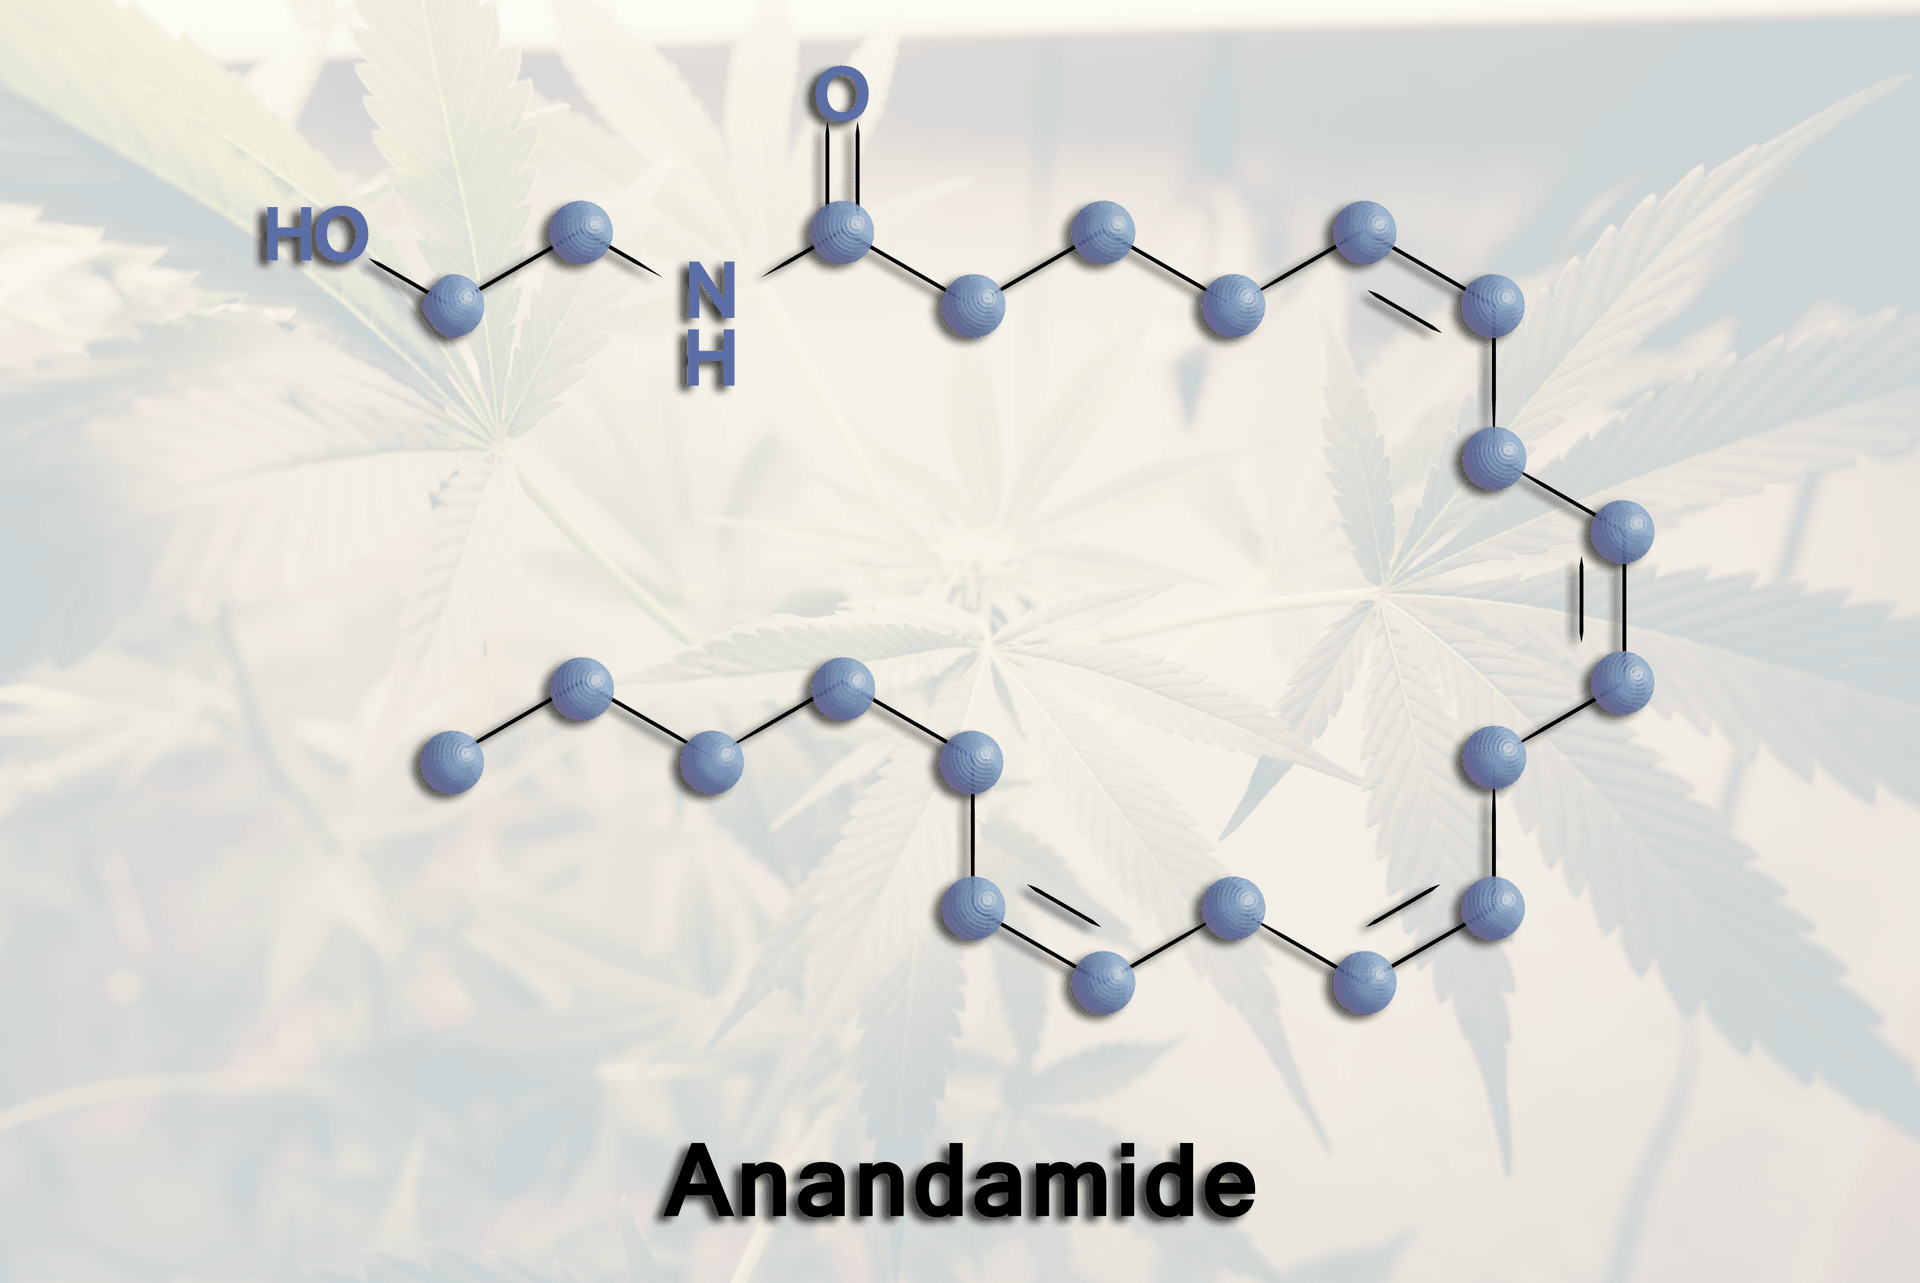 Anandamide – The Natural Cannabinoid Your Body Produces